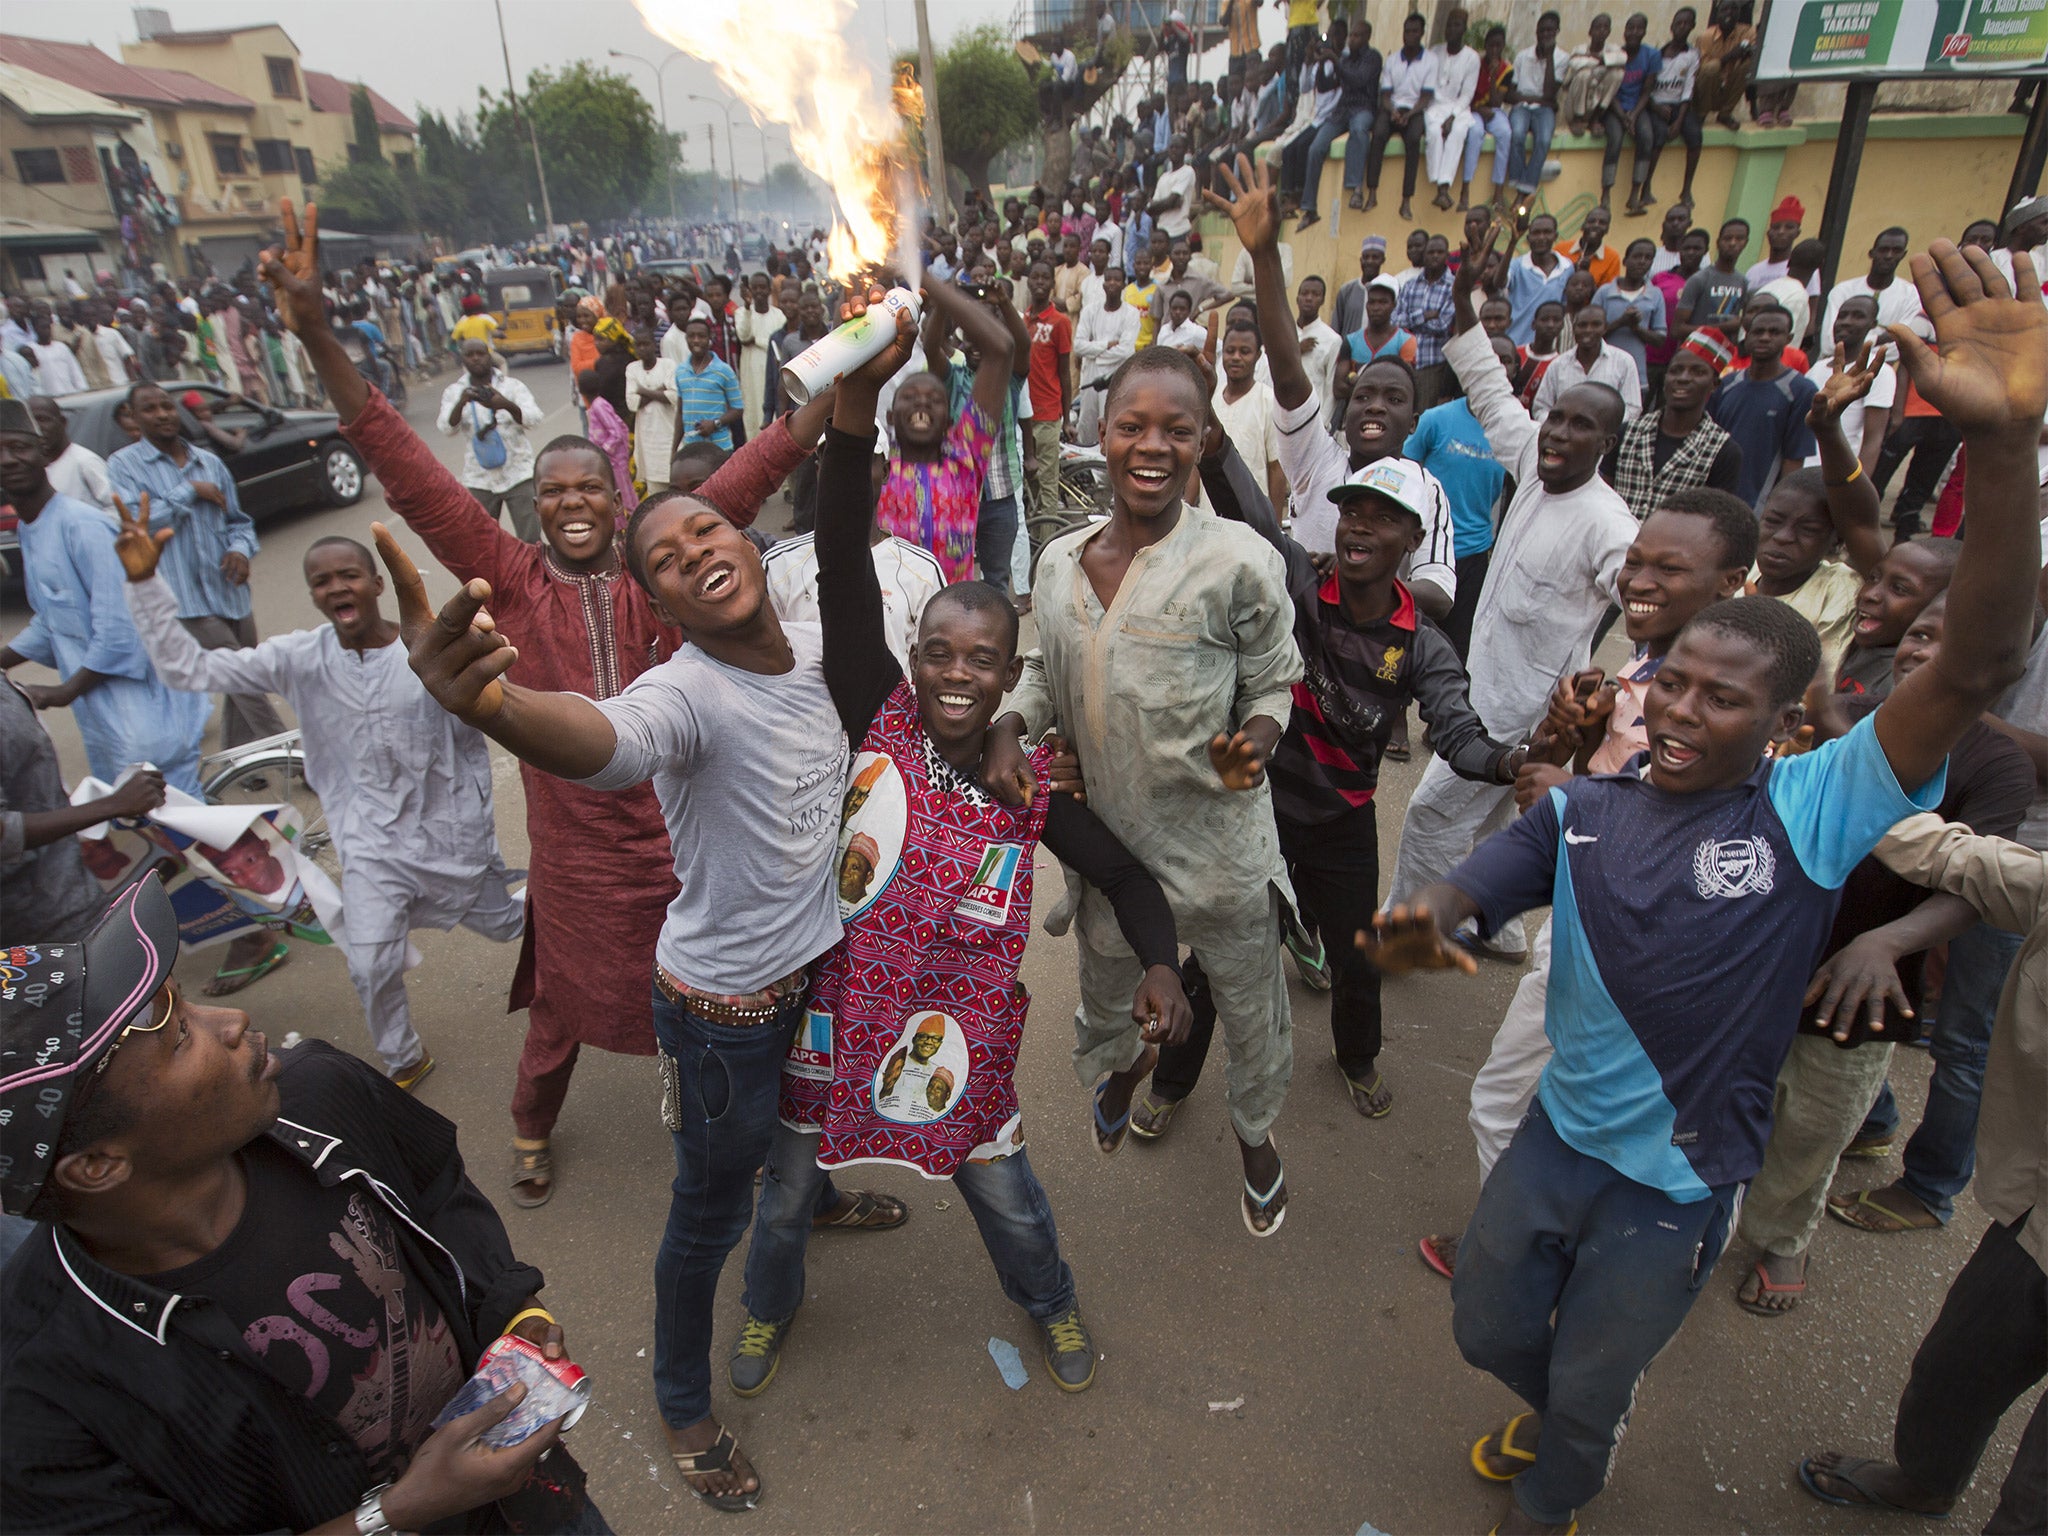 Supporters of Muhammadu Buhari celebrate in Kano following his election win